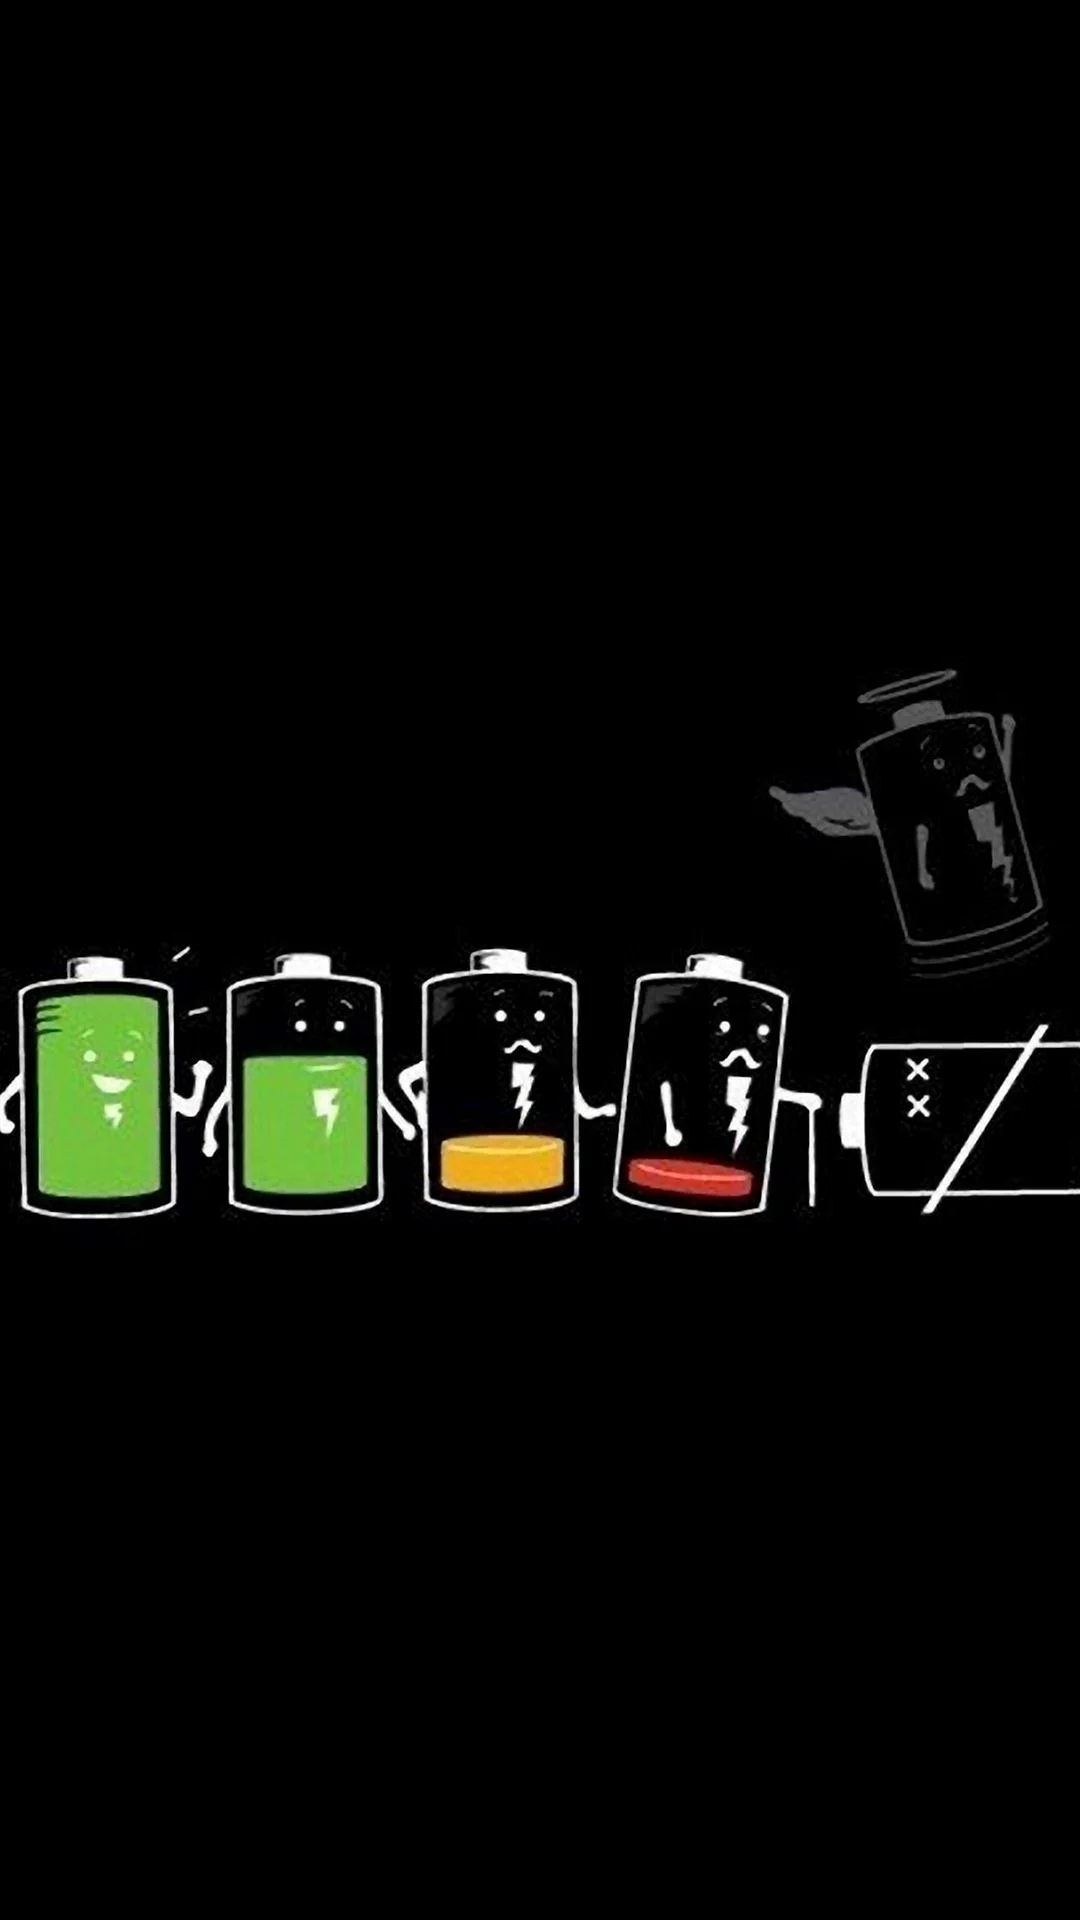 Dead Battery Wallpaper For iPhone